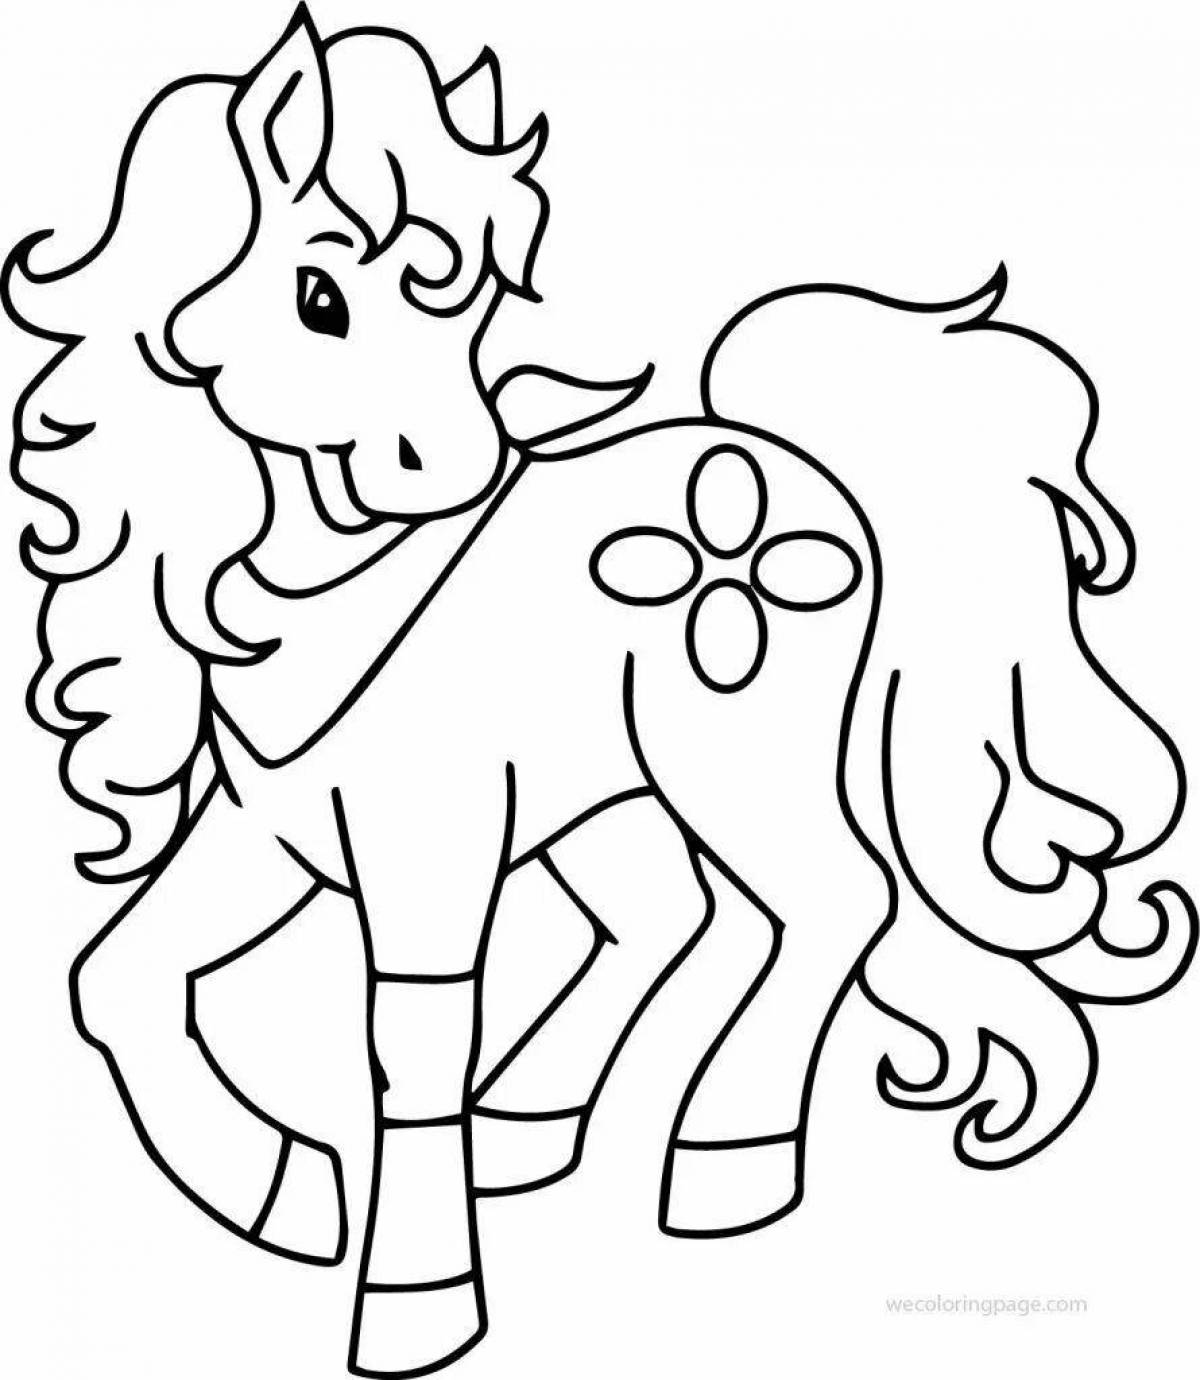 Joyful coloring horse for children 4-5 years old